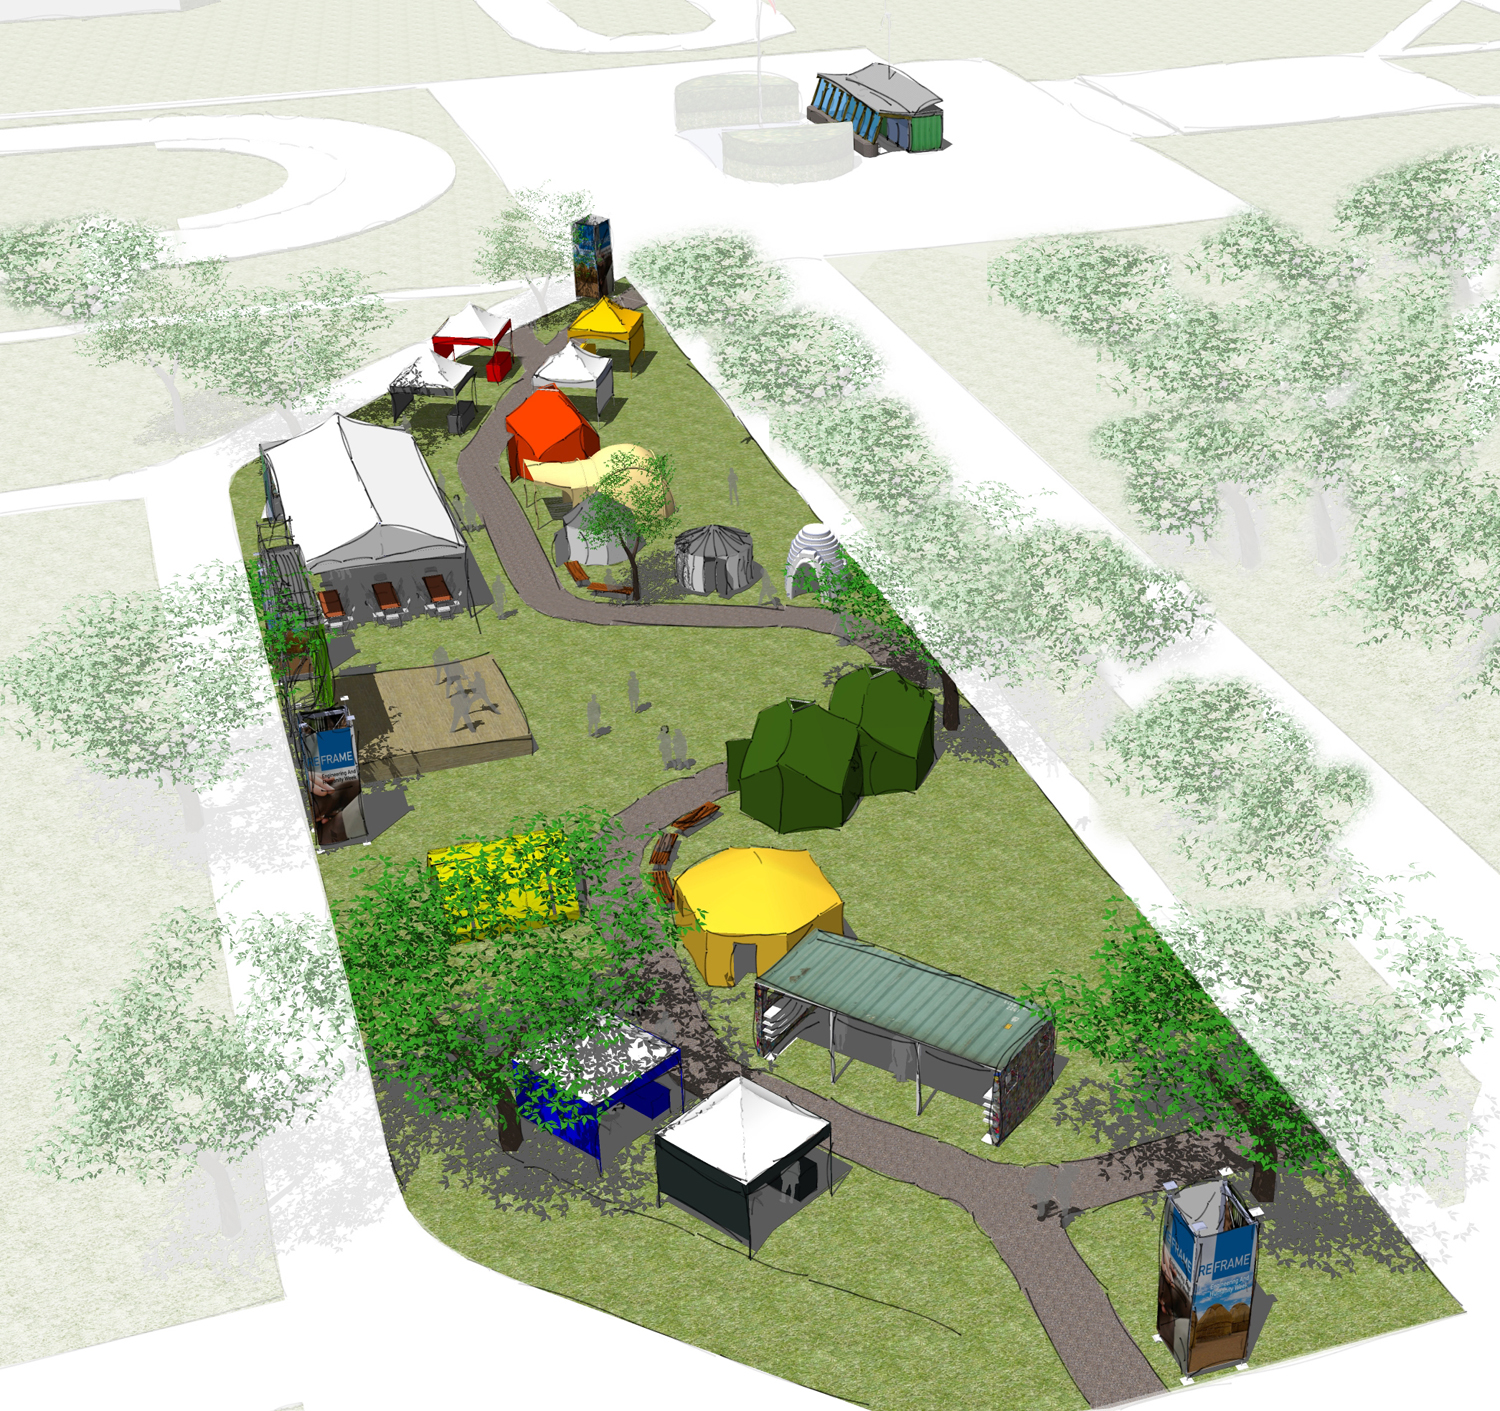 Rendering of the 'Living Village' at SMU for Engineering and Humanity Week